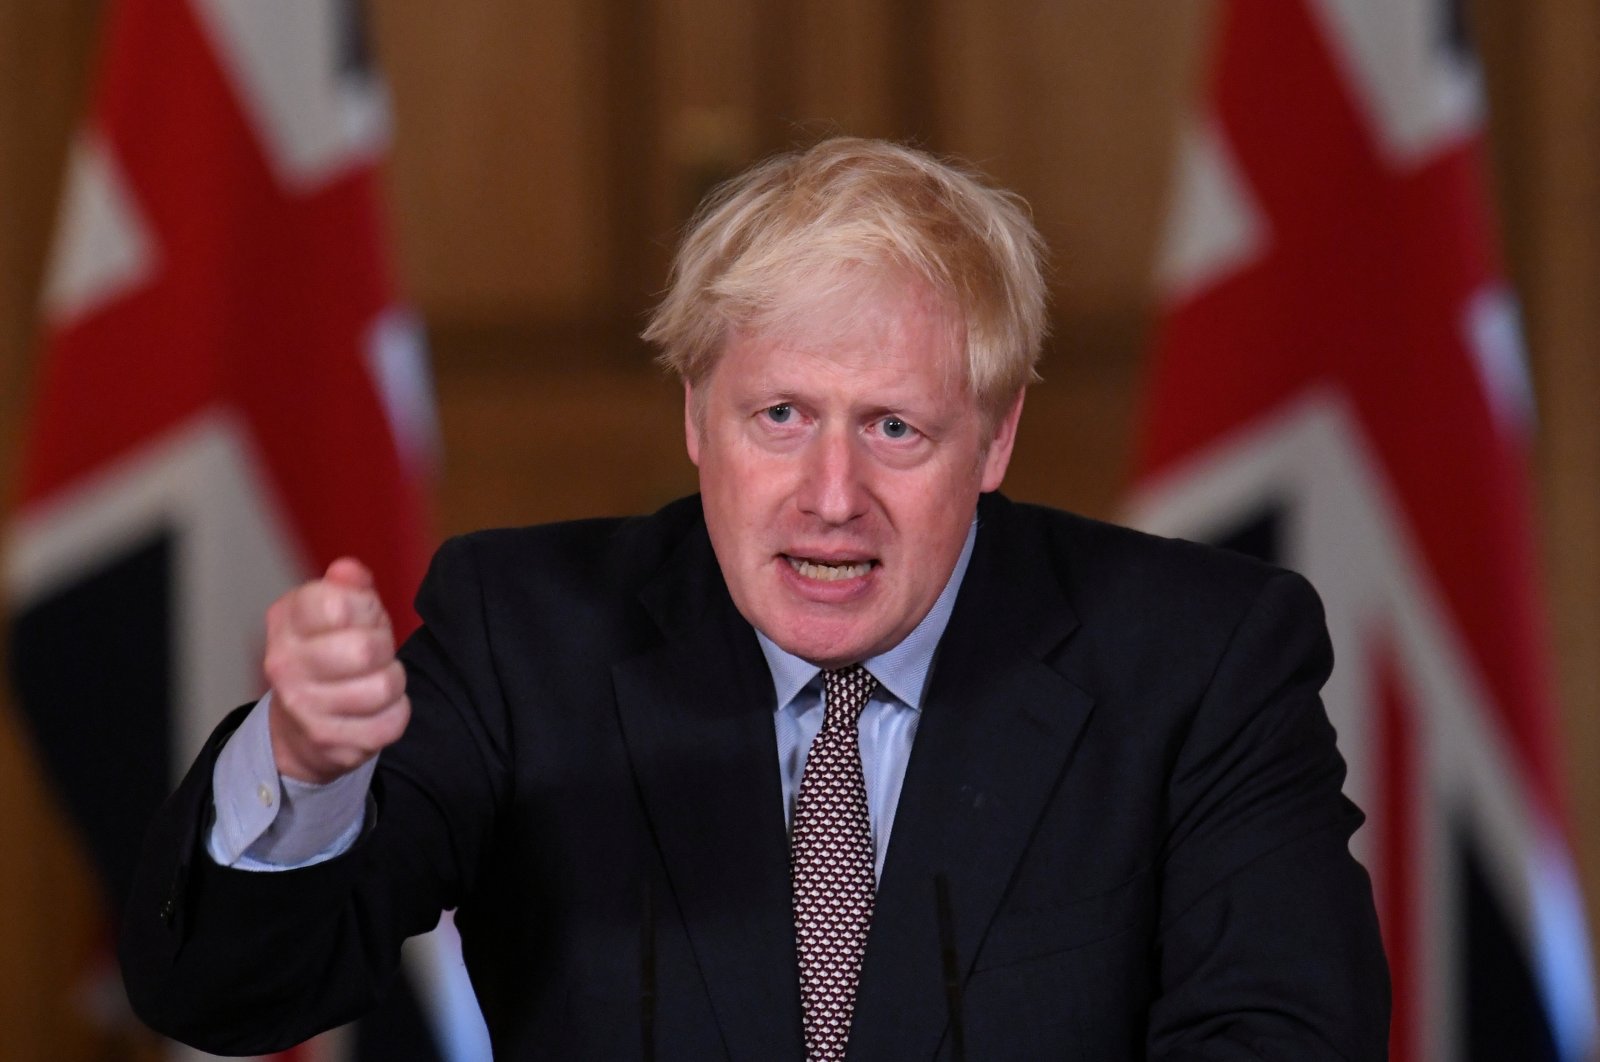 Britain's Prime Minister Boris Johnson speaks during a virtual news conference on the ongoing situation with the coronavirus disease (COVID-19), at Downing Street, London, Britain Sept. 9, 2020. (Reuters Photo)